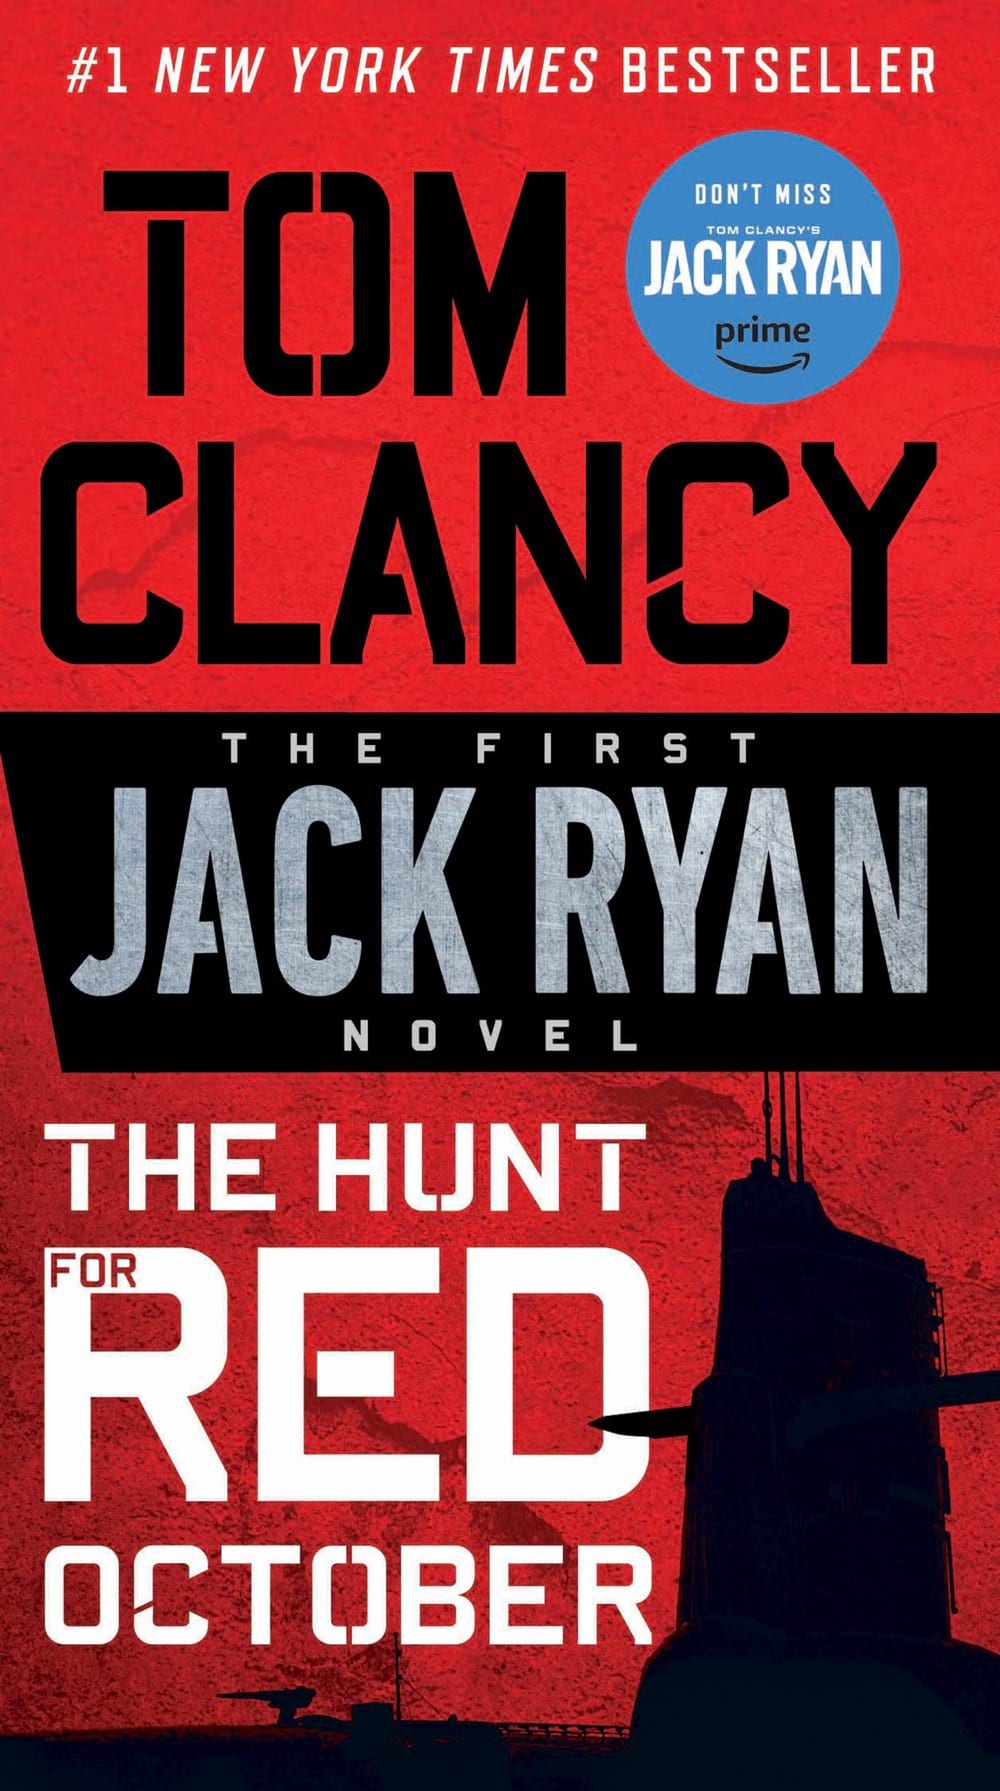 The cover of The Hunt for Red October